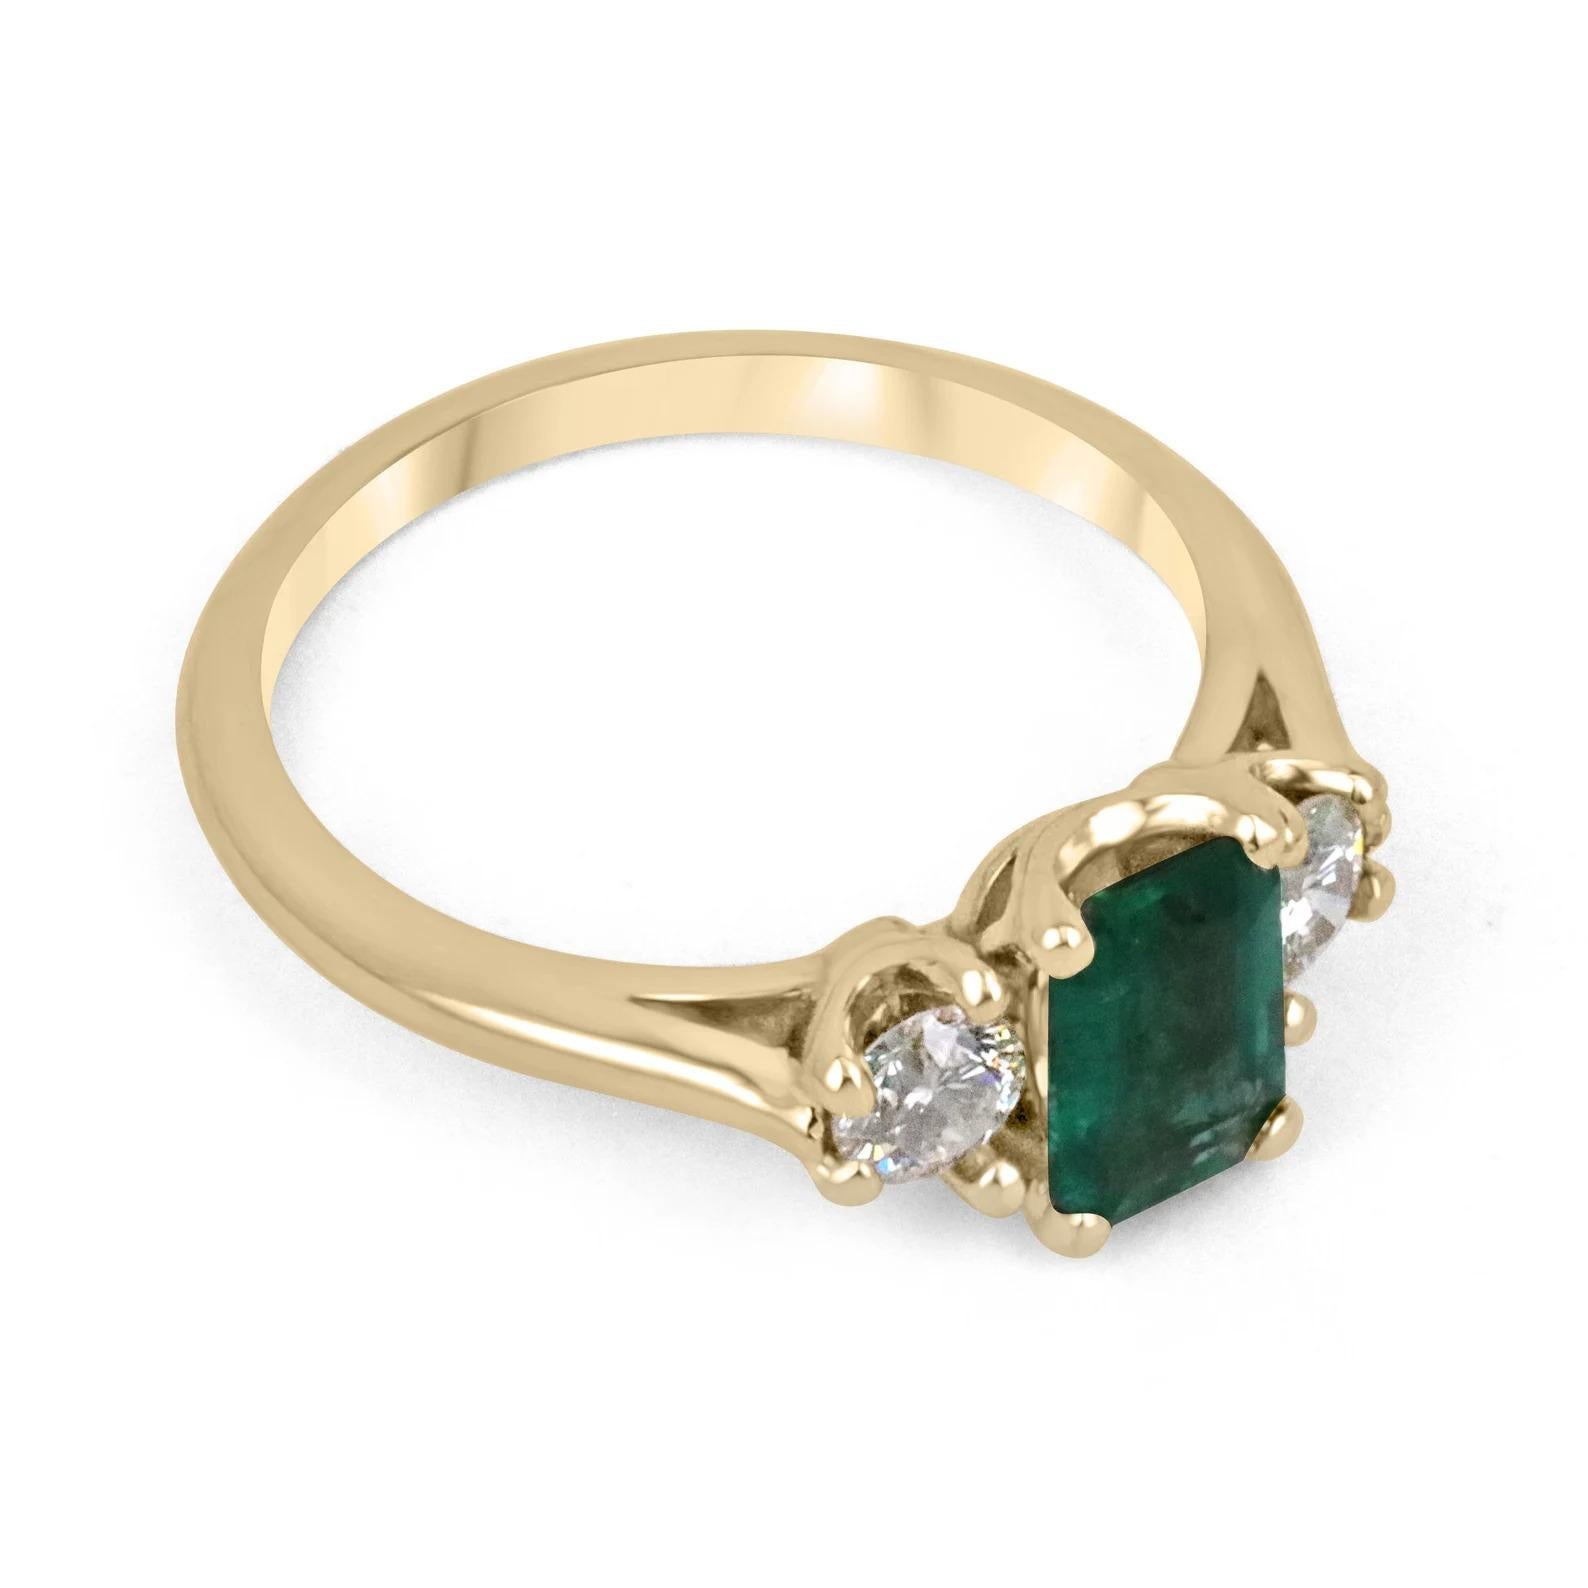 A classic emerald and diamond engagement, statement, or right-hand ring. Dexterously handcrafted in gleaming 14K gold this ring features a rare vivid 1.0-carat natural emerald-emerald cut. Set in a secure prong setting, this extraordinary emerald